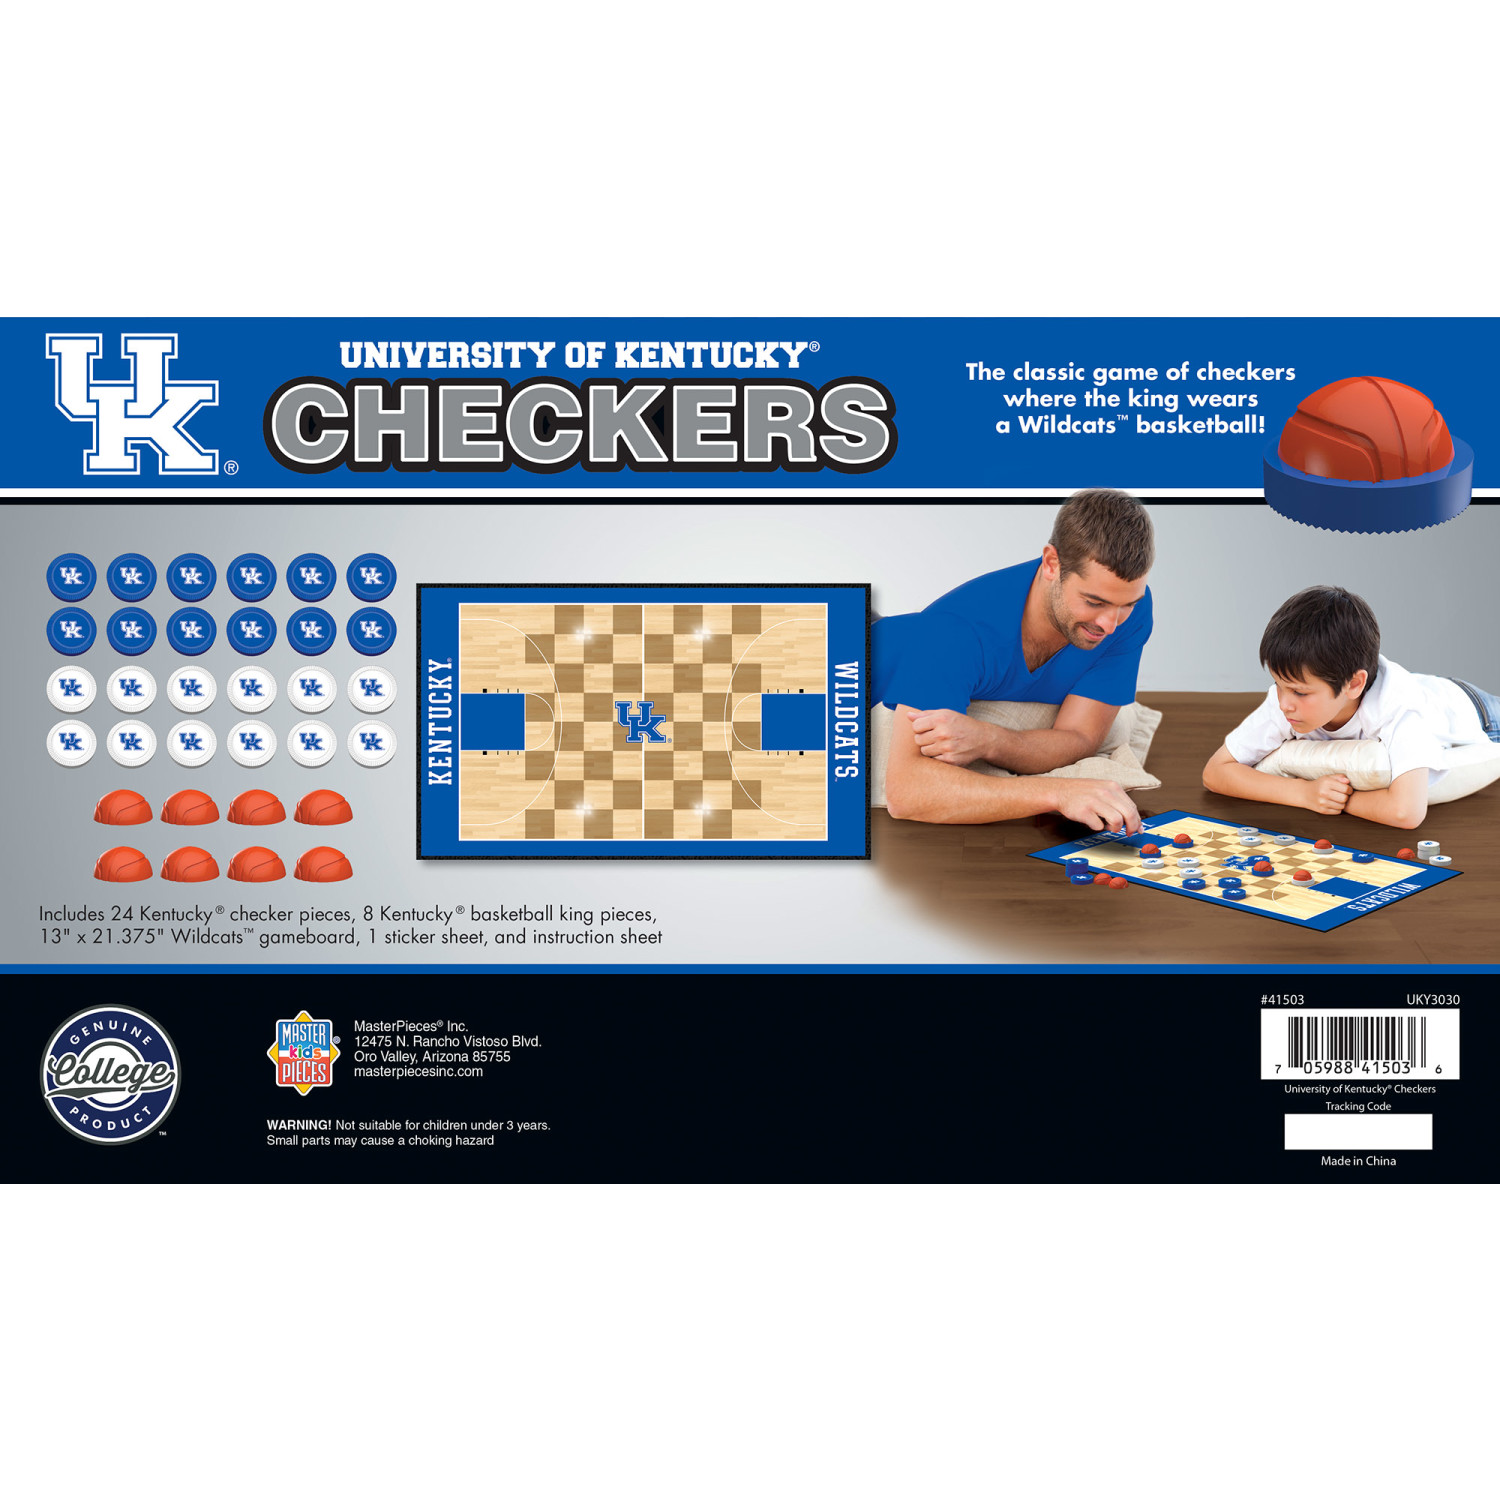 MasterPieces Officially licensed NCAA Kentucky Wildcats Checkers Board Game for Families and Kids ages 6 and Up - image 4 of 5